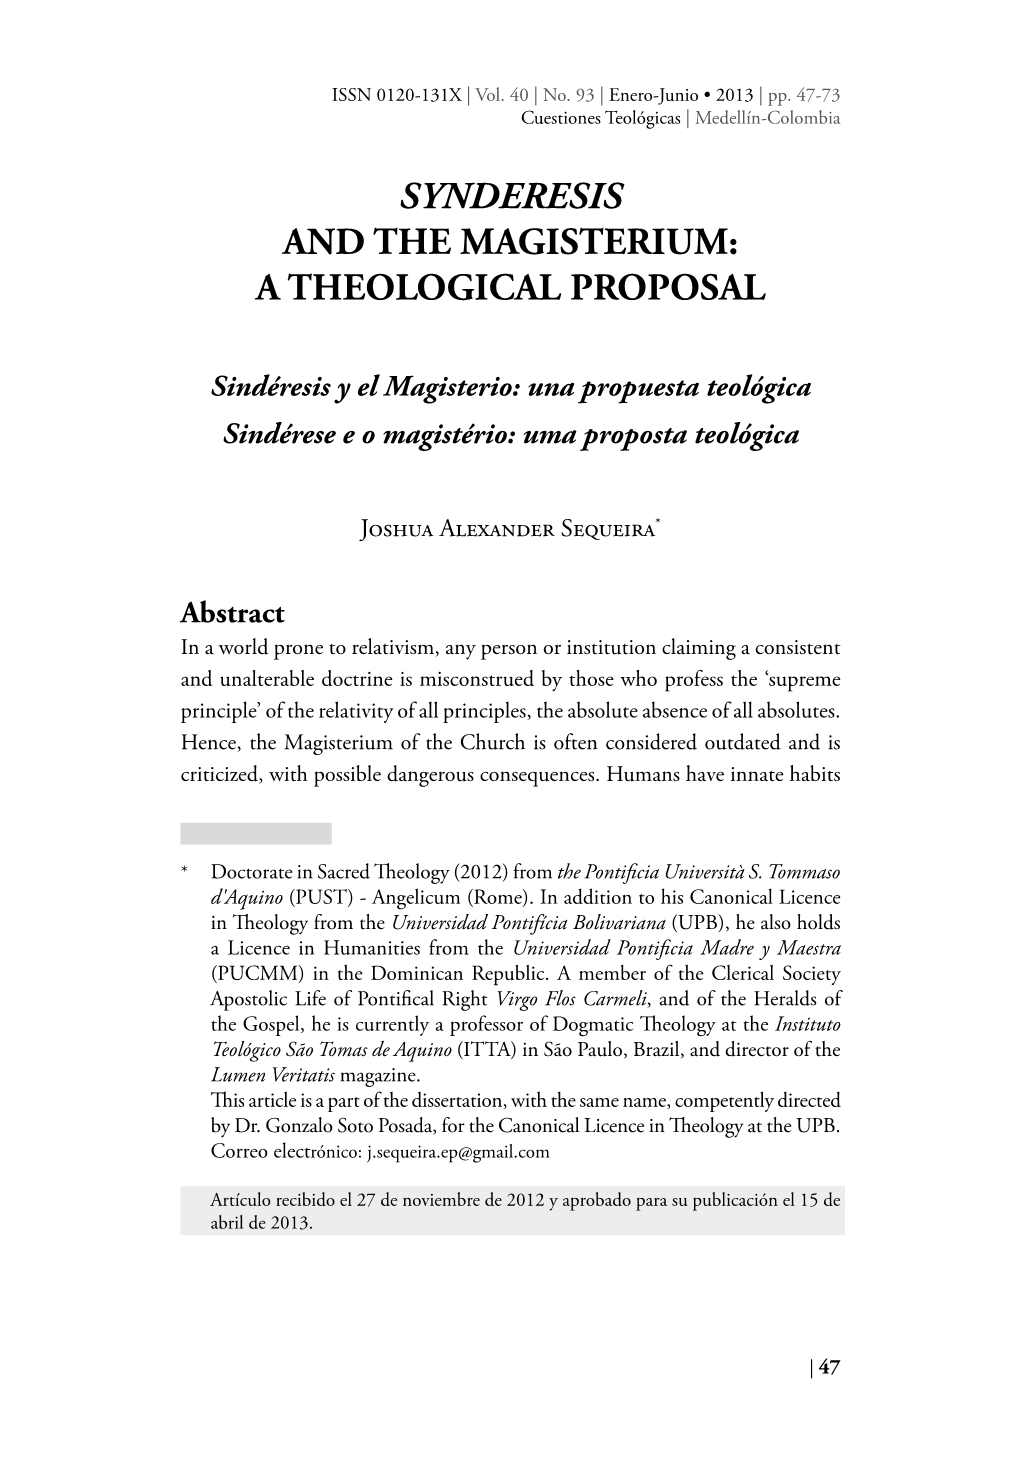 Synderesis and the Magisterium: a Theological Proposal